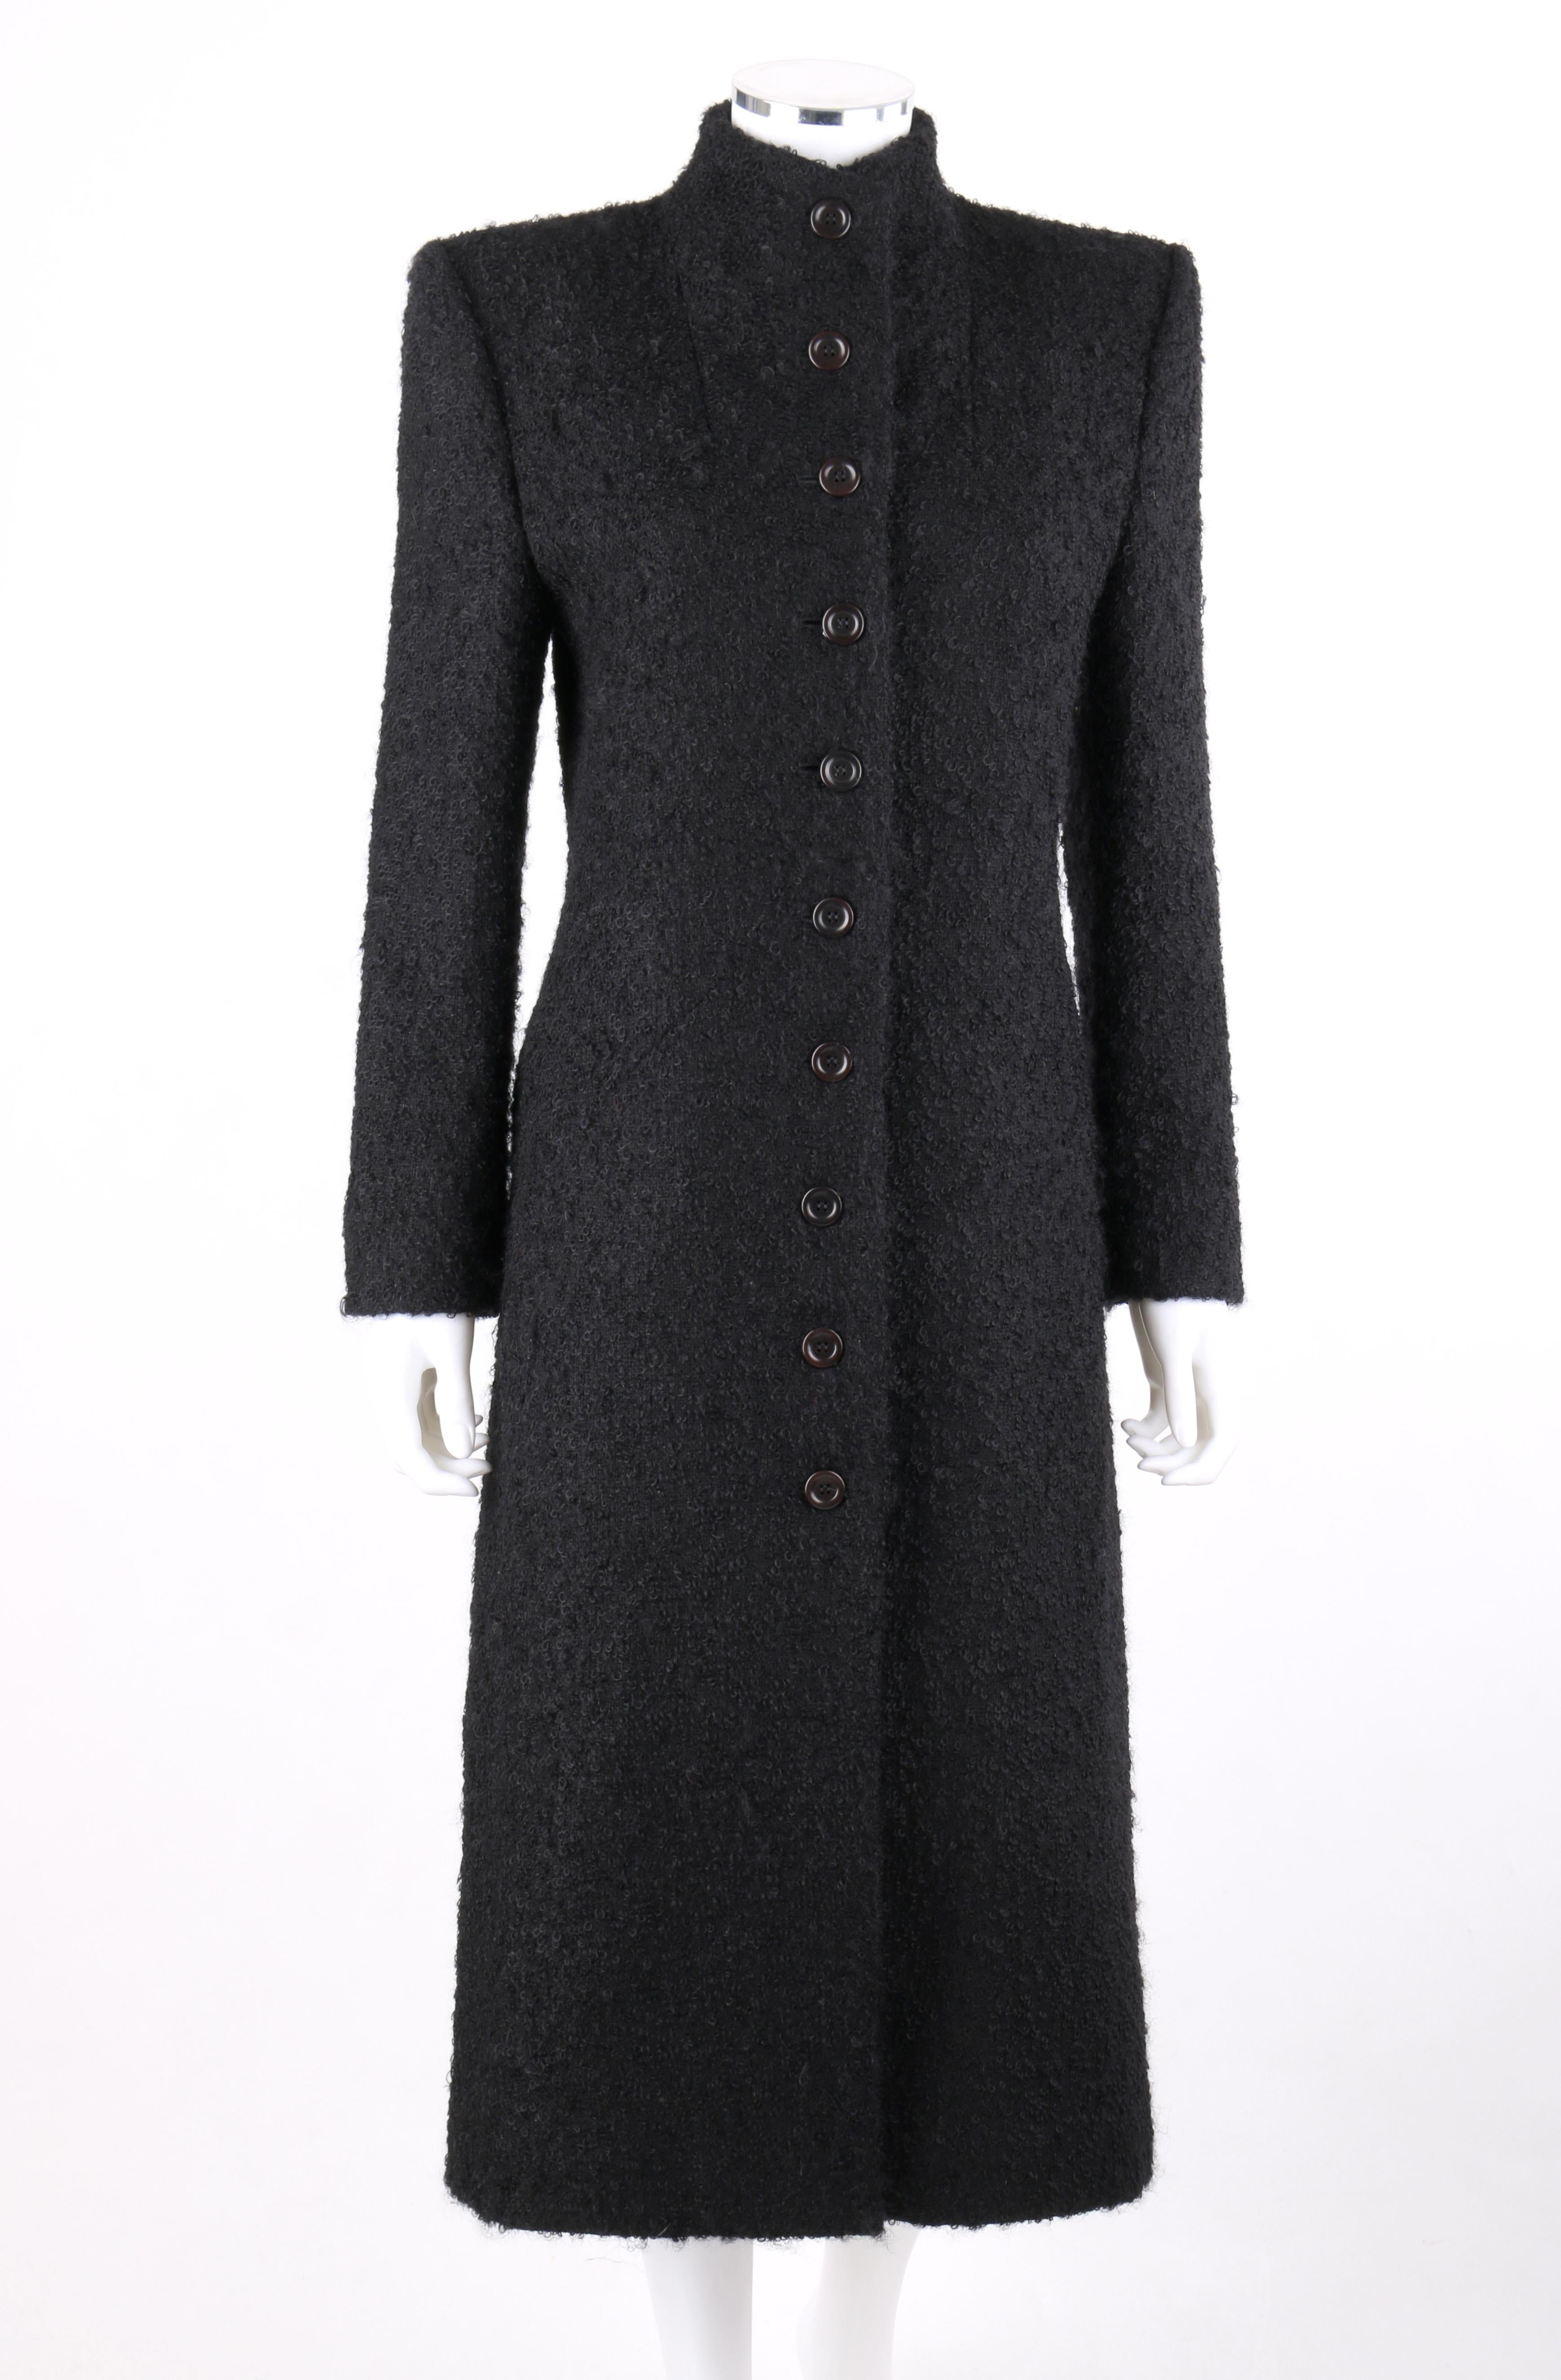 DESCRIPTION: GIVENCHY Couture A/W 1998 ALEXANDER McQUEEN Mohair Exaggerated Shoulder Overcoat
 
Brand / Manufacturer: Givenchy
Collection: Couture; Autumn / Winter 1998 
Designer: Alexander McQueen
Manufacturer Style Name: 
Style: Overcoat
Color(s):